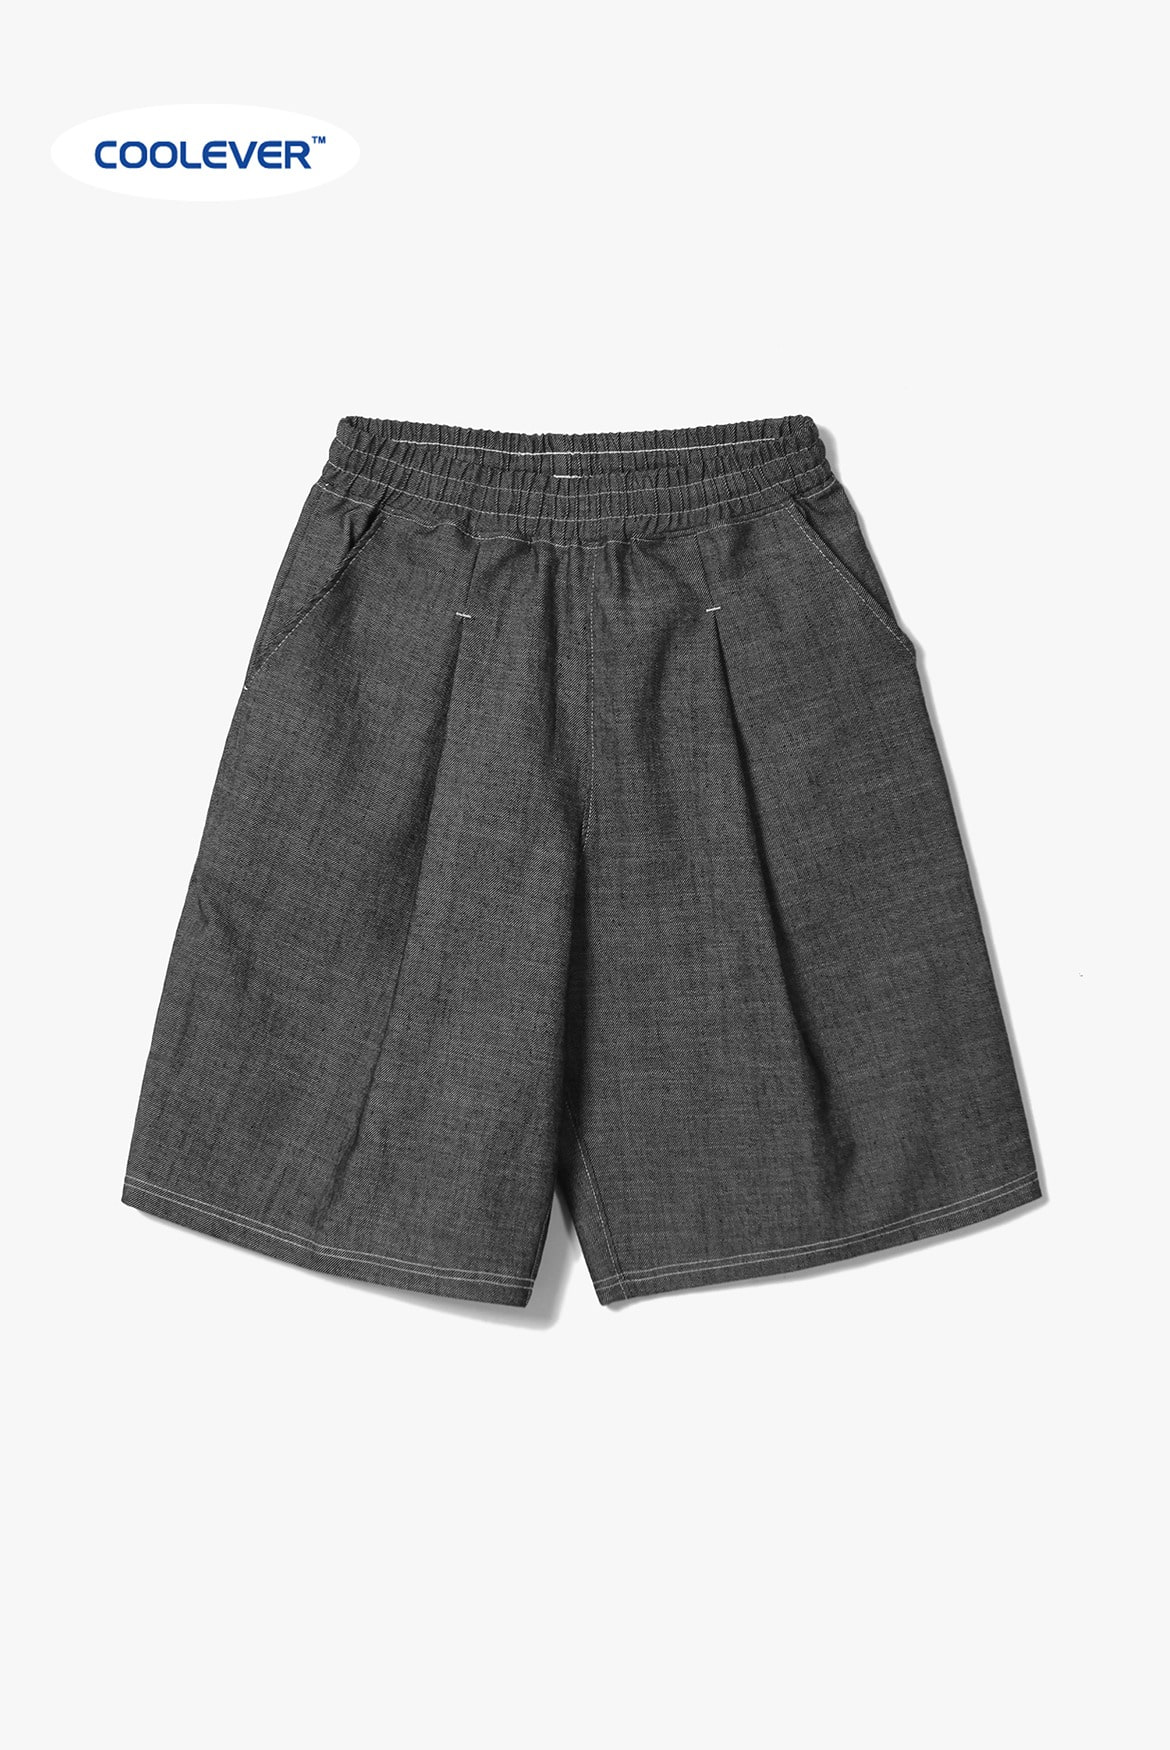 Clean Coolever Tuck Banding Shorts [Black]